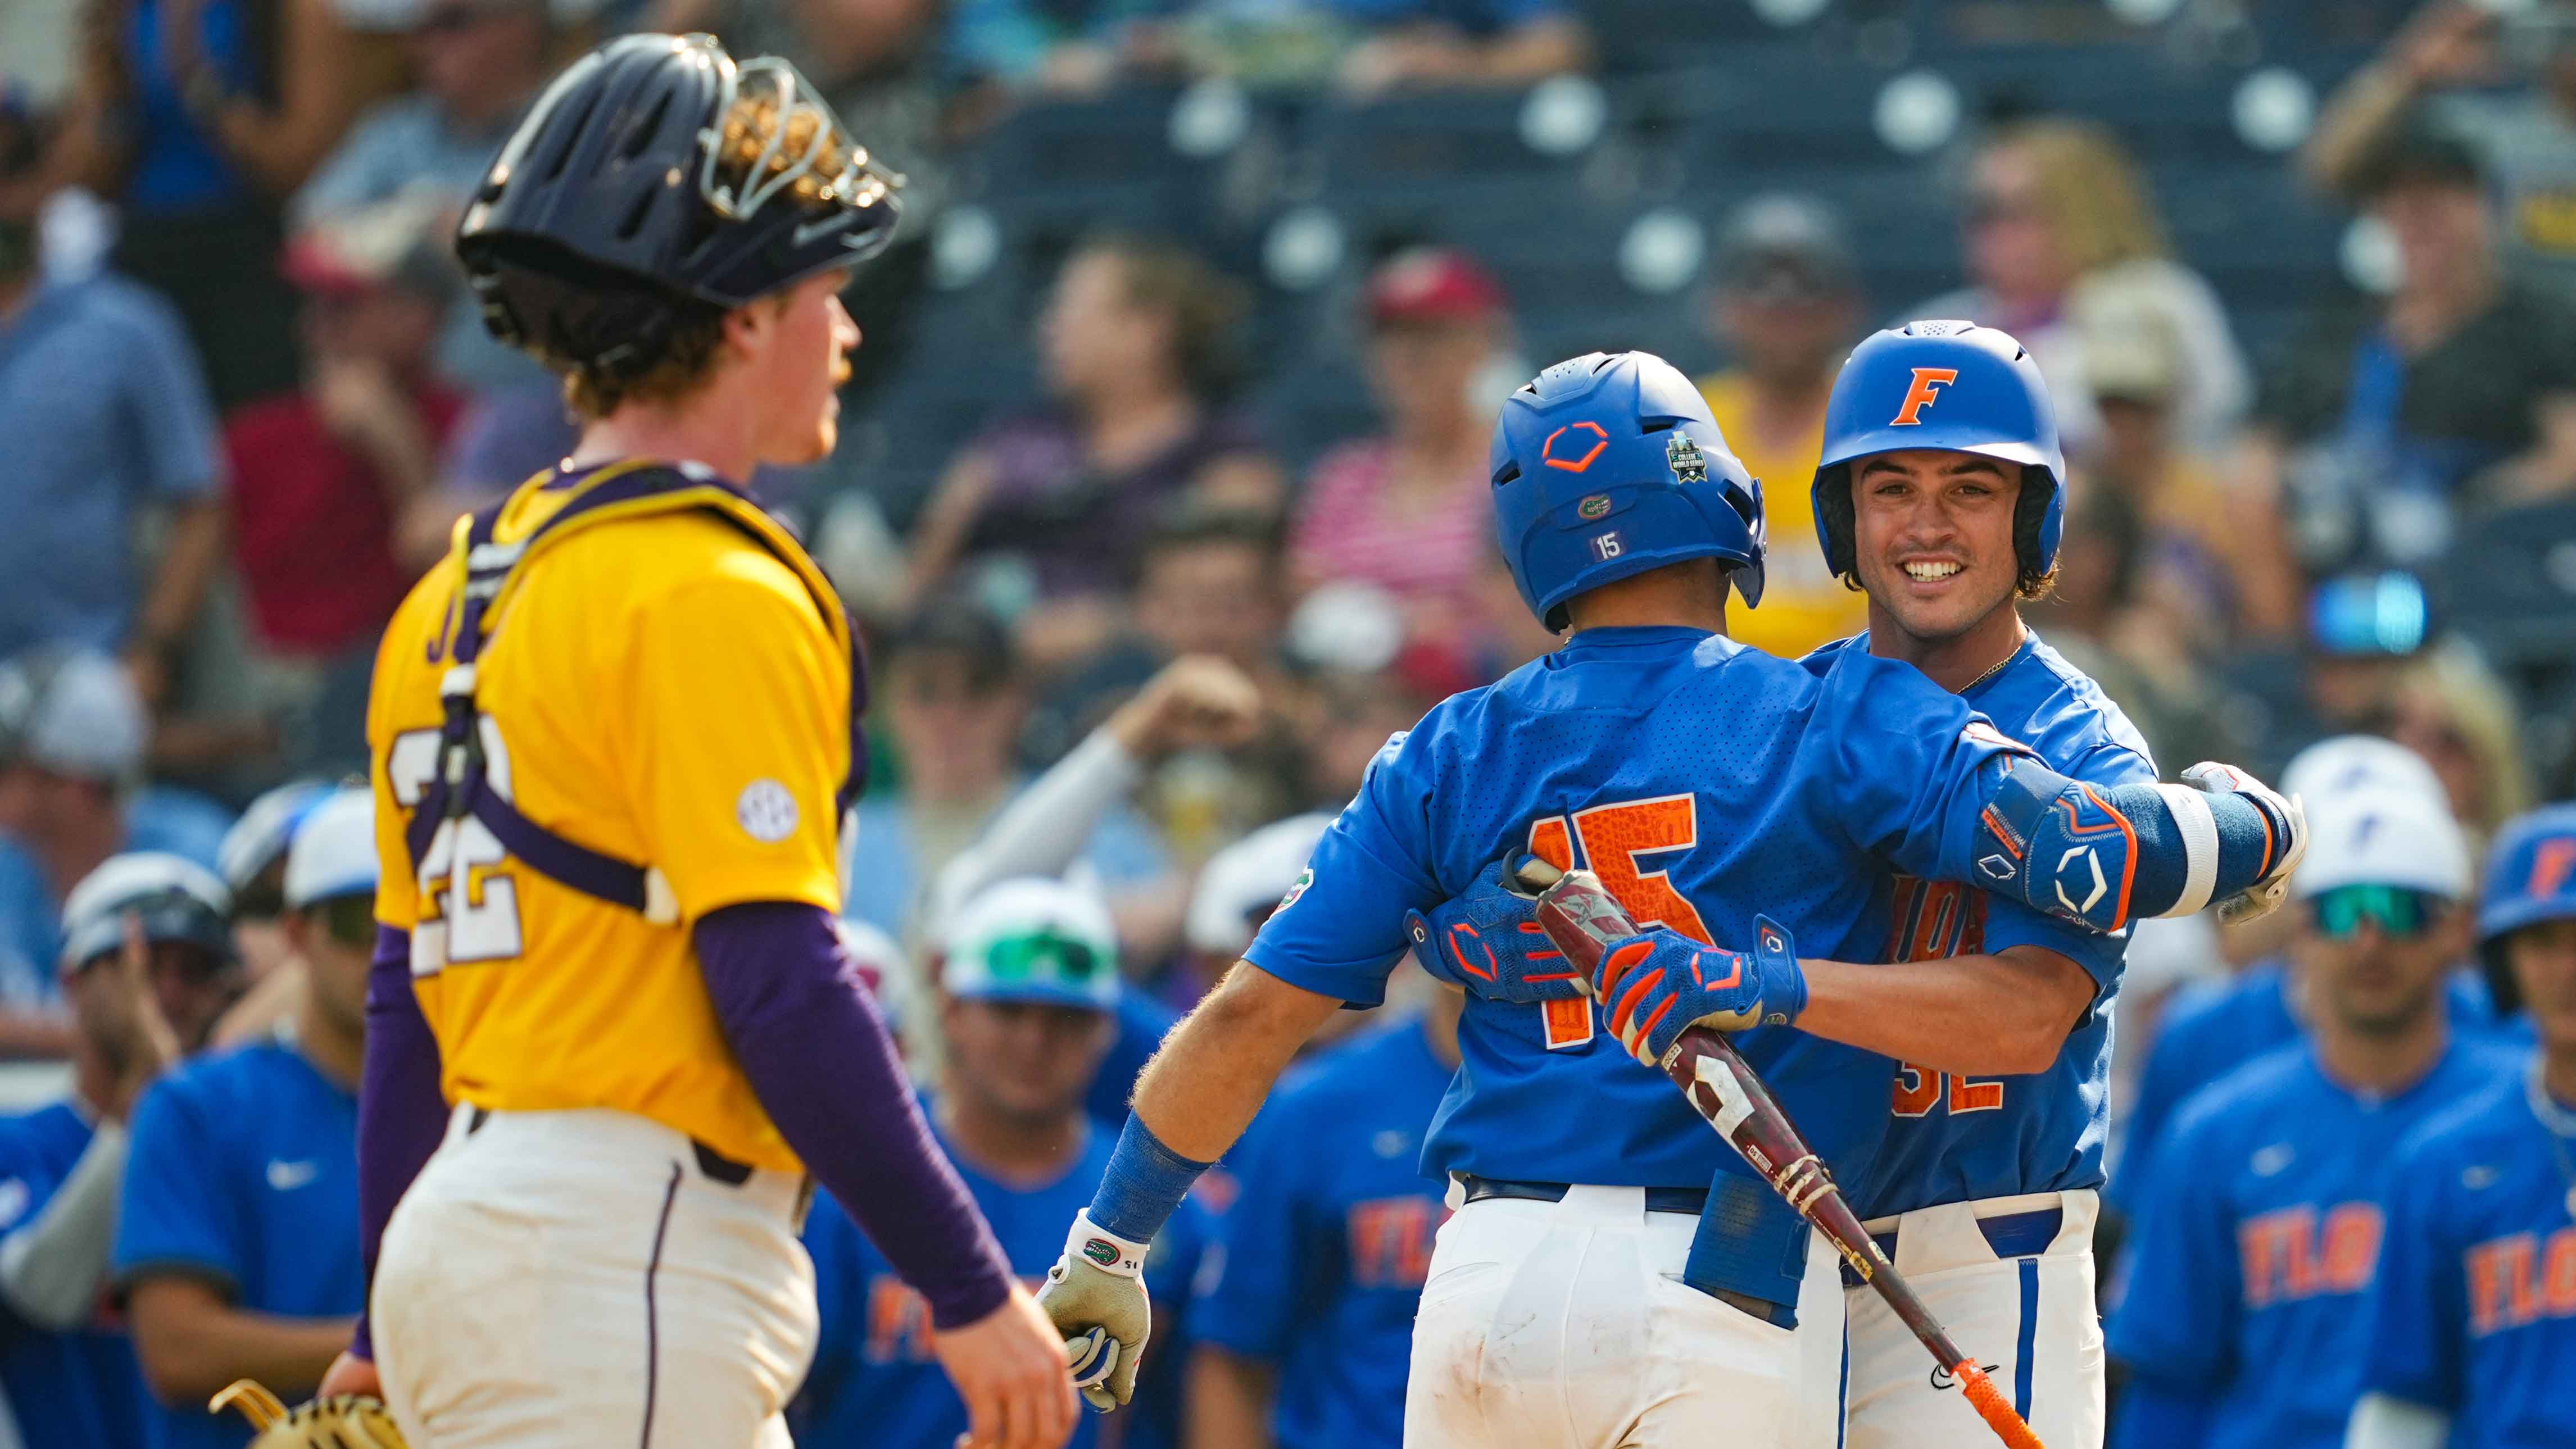 LSU To Take On Florida In Men's College World Series Finals